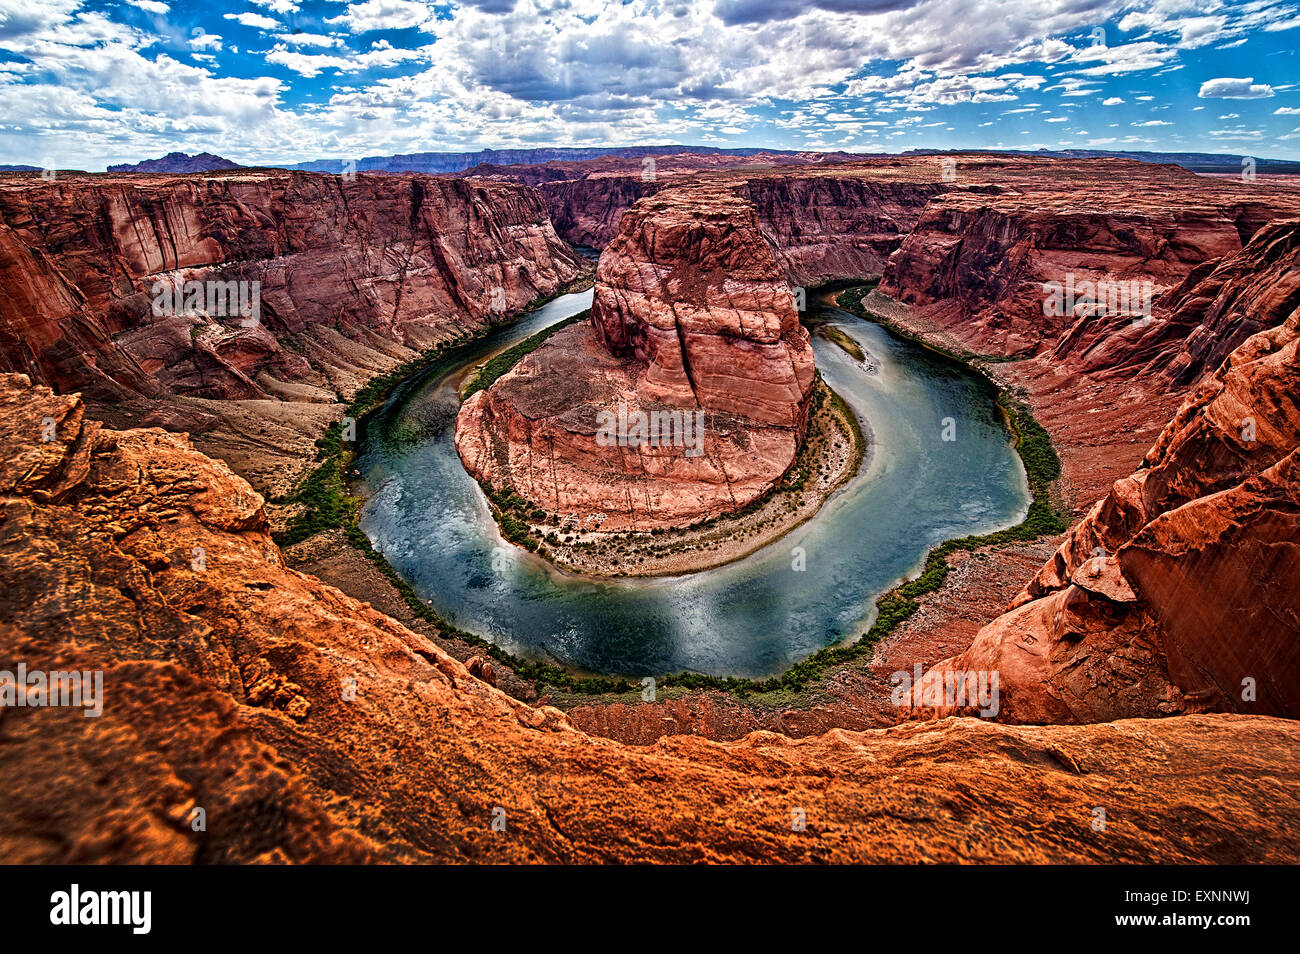 Image from top looking down on horseshoe canyon Stock Photo - Alamy